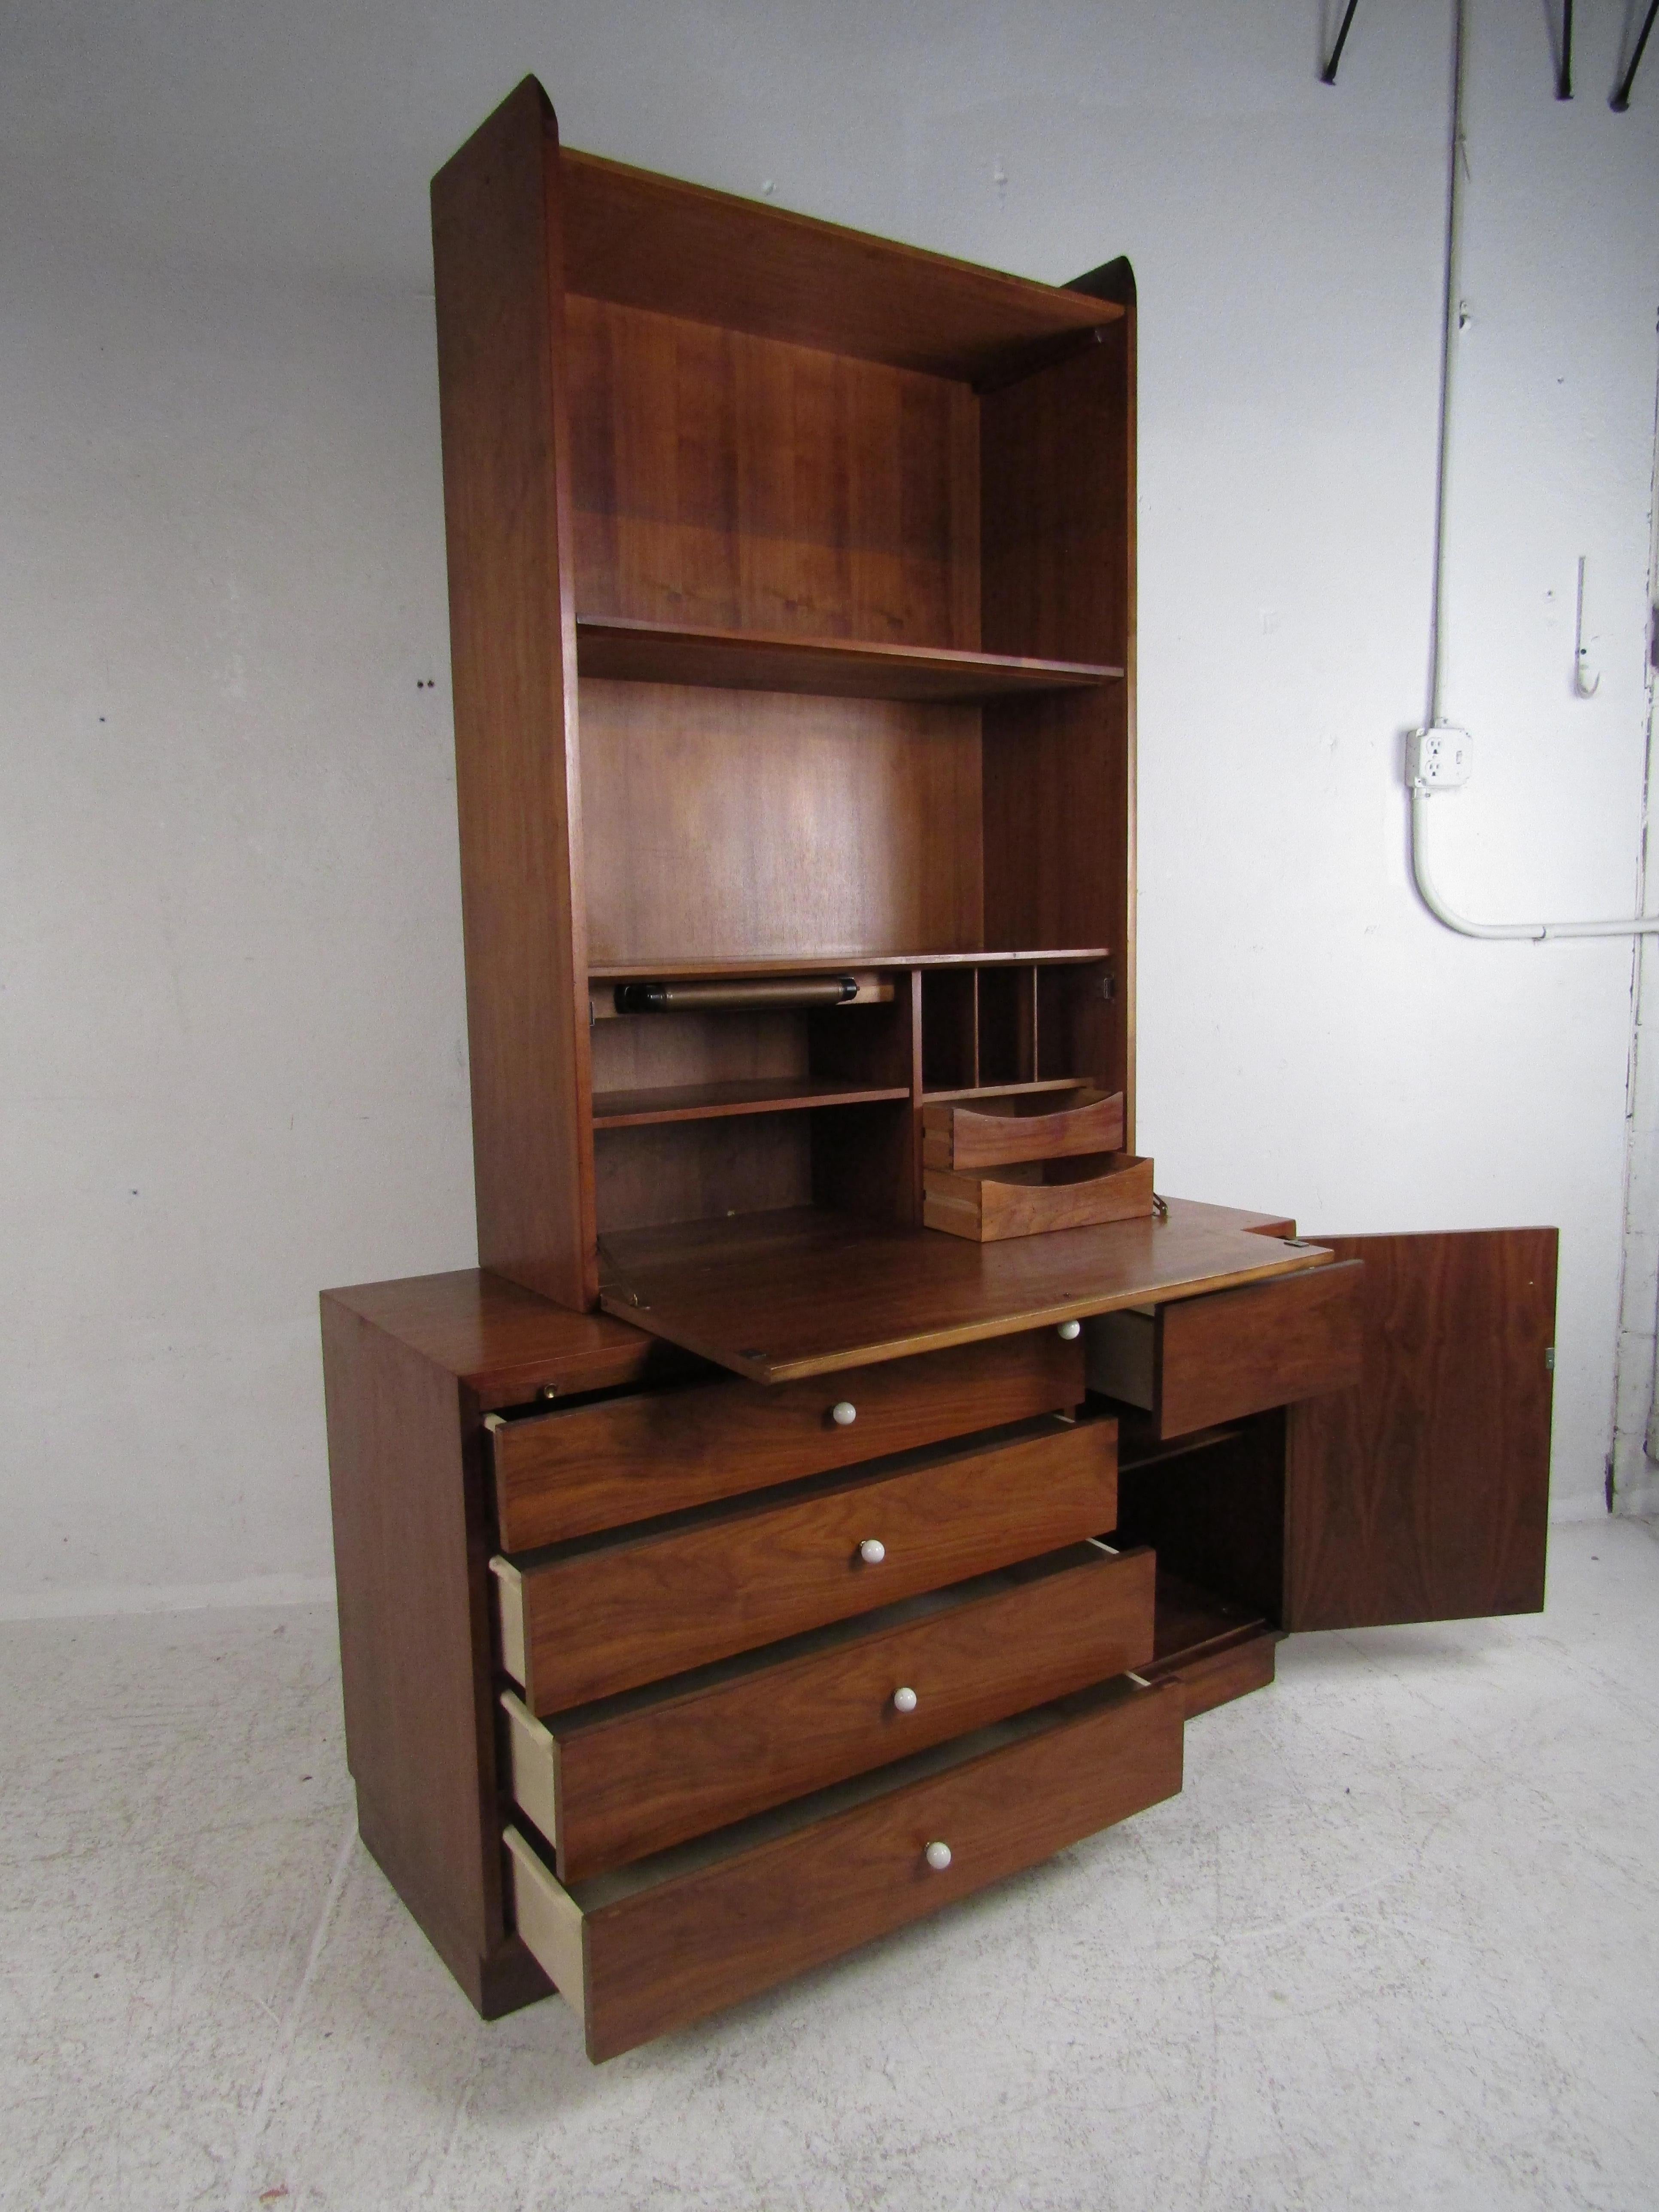 A beautiful vintage modern wall unit that consists of two pieces. A unique design that offers plenty of storage without sacrificing style. Sturdy construction, elegant walnut wood grain, and iconic round white drawer pulls show quality midcentury